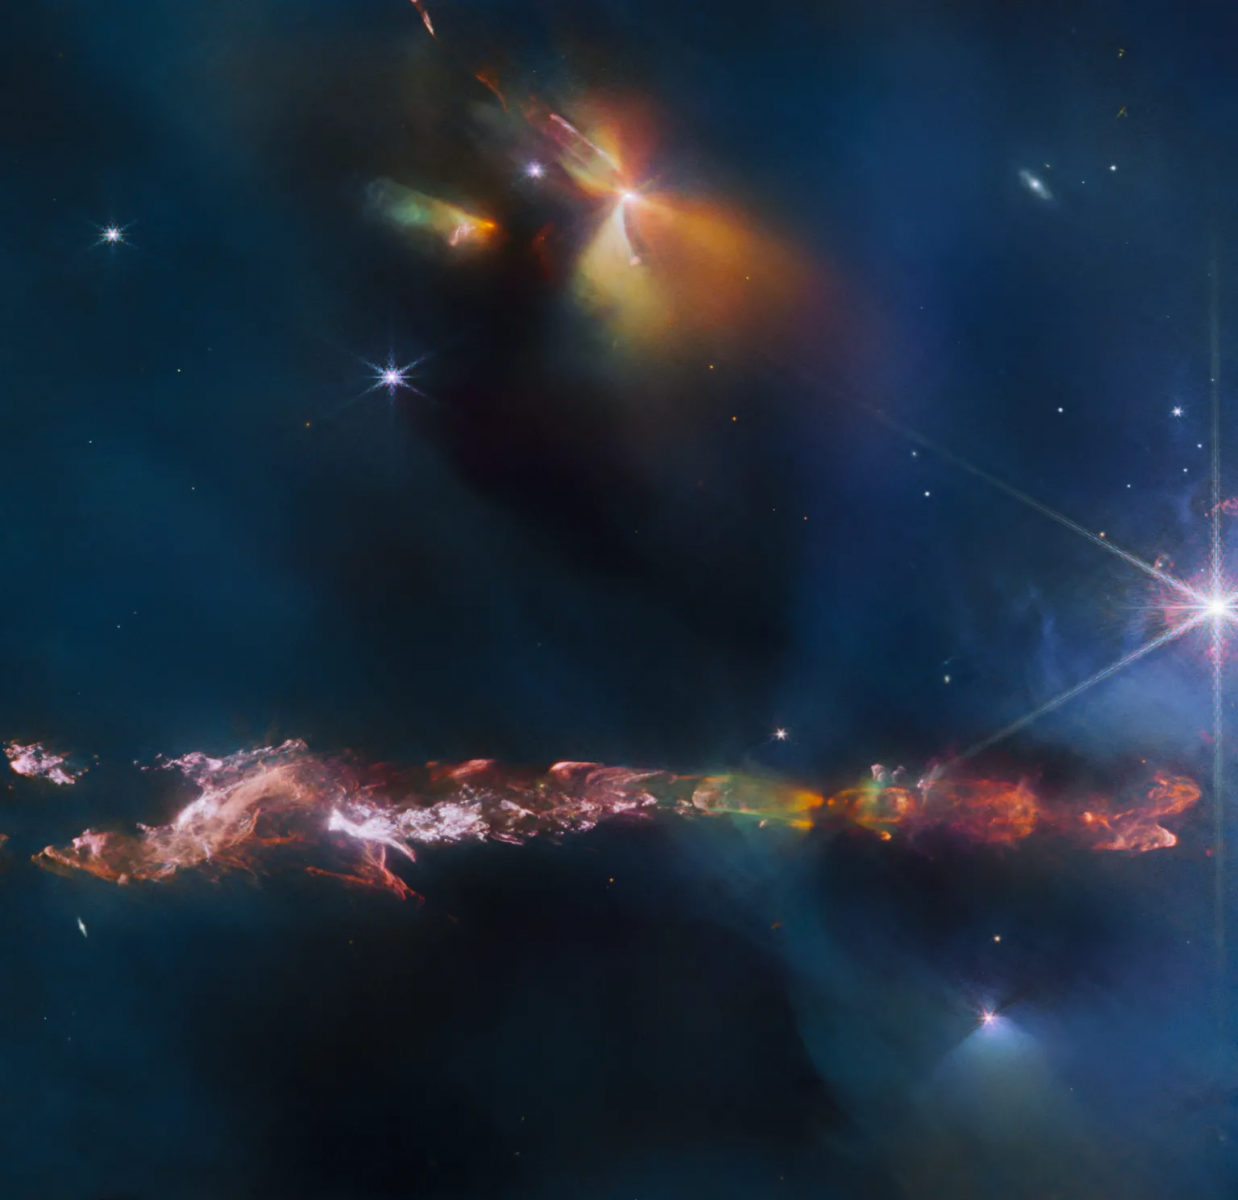 NASA's James Webb Space Telescope Captures New Breathtaking Display of Star Formation